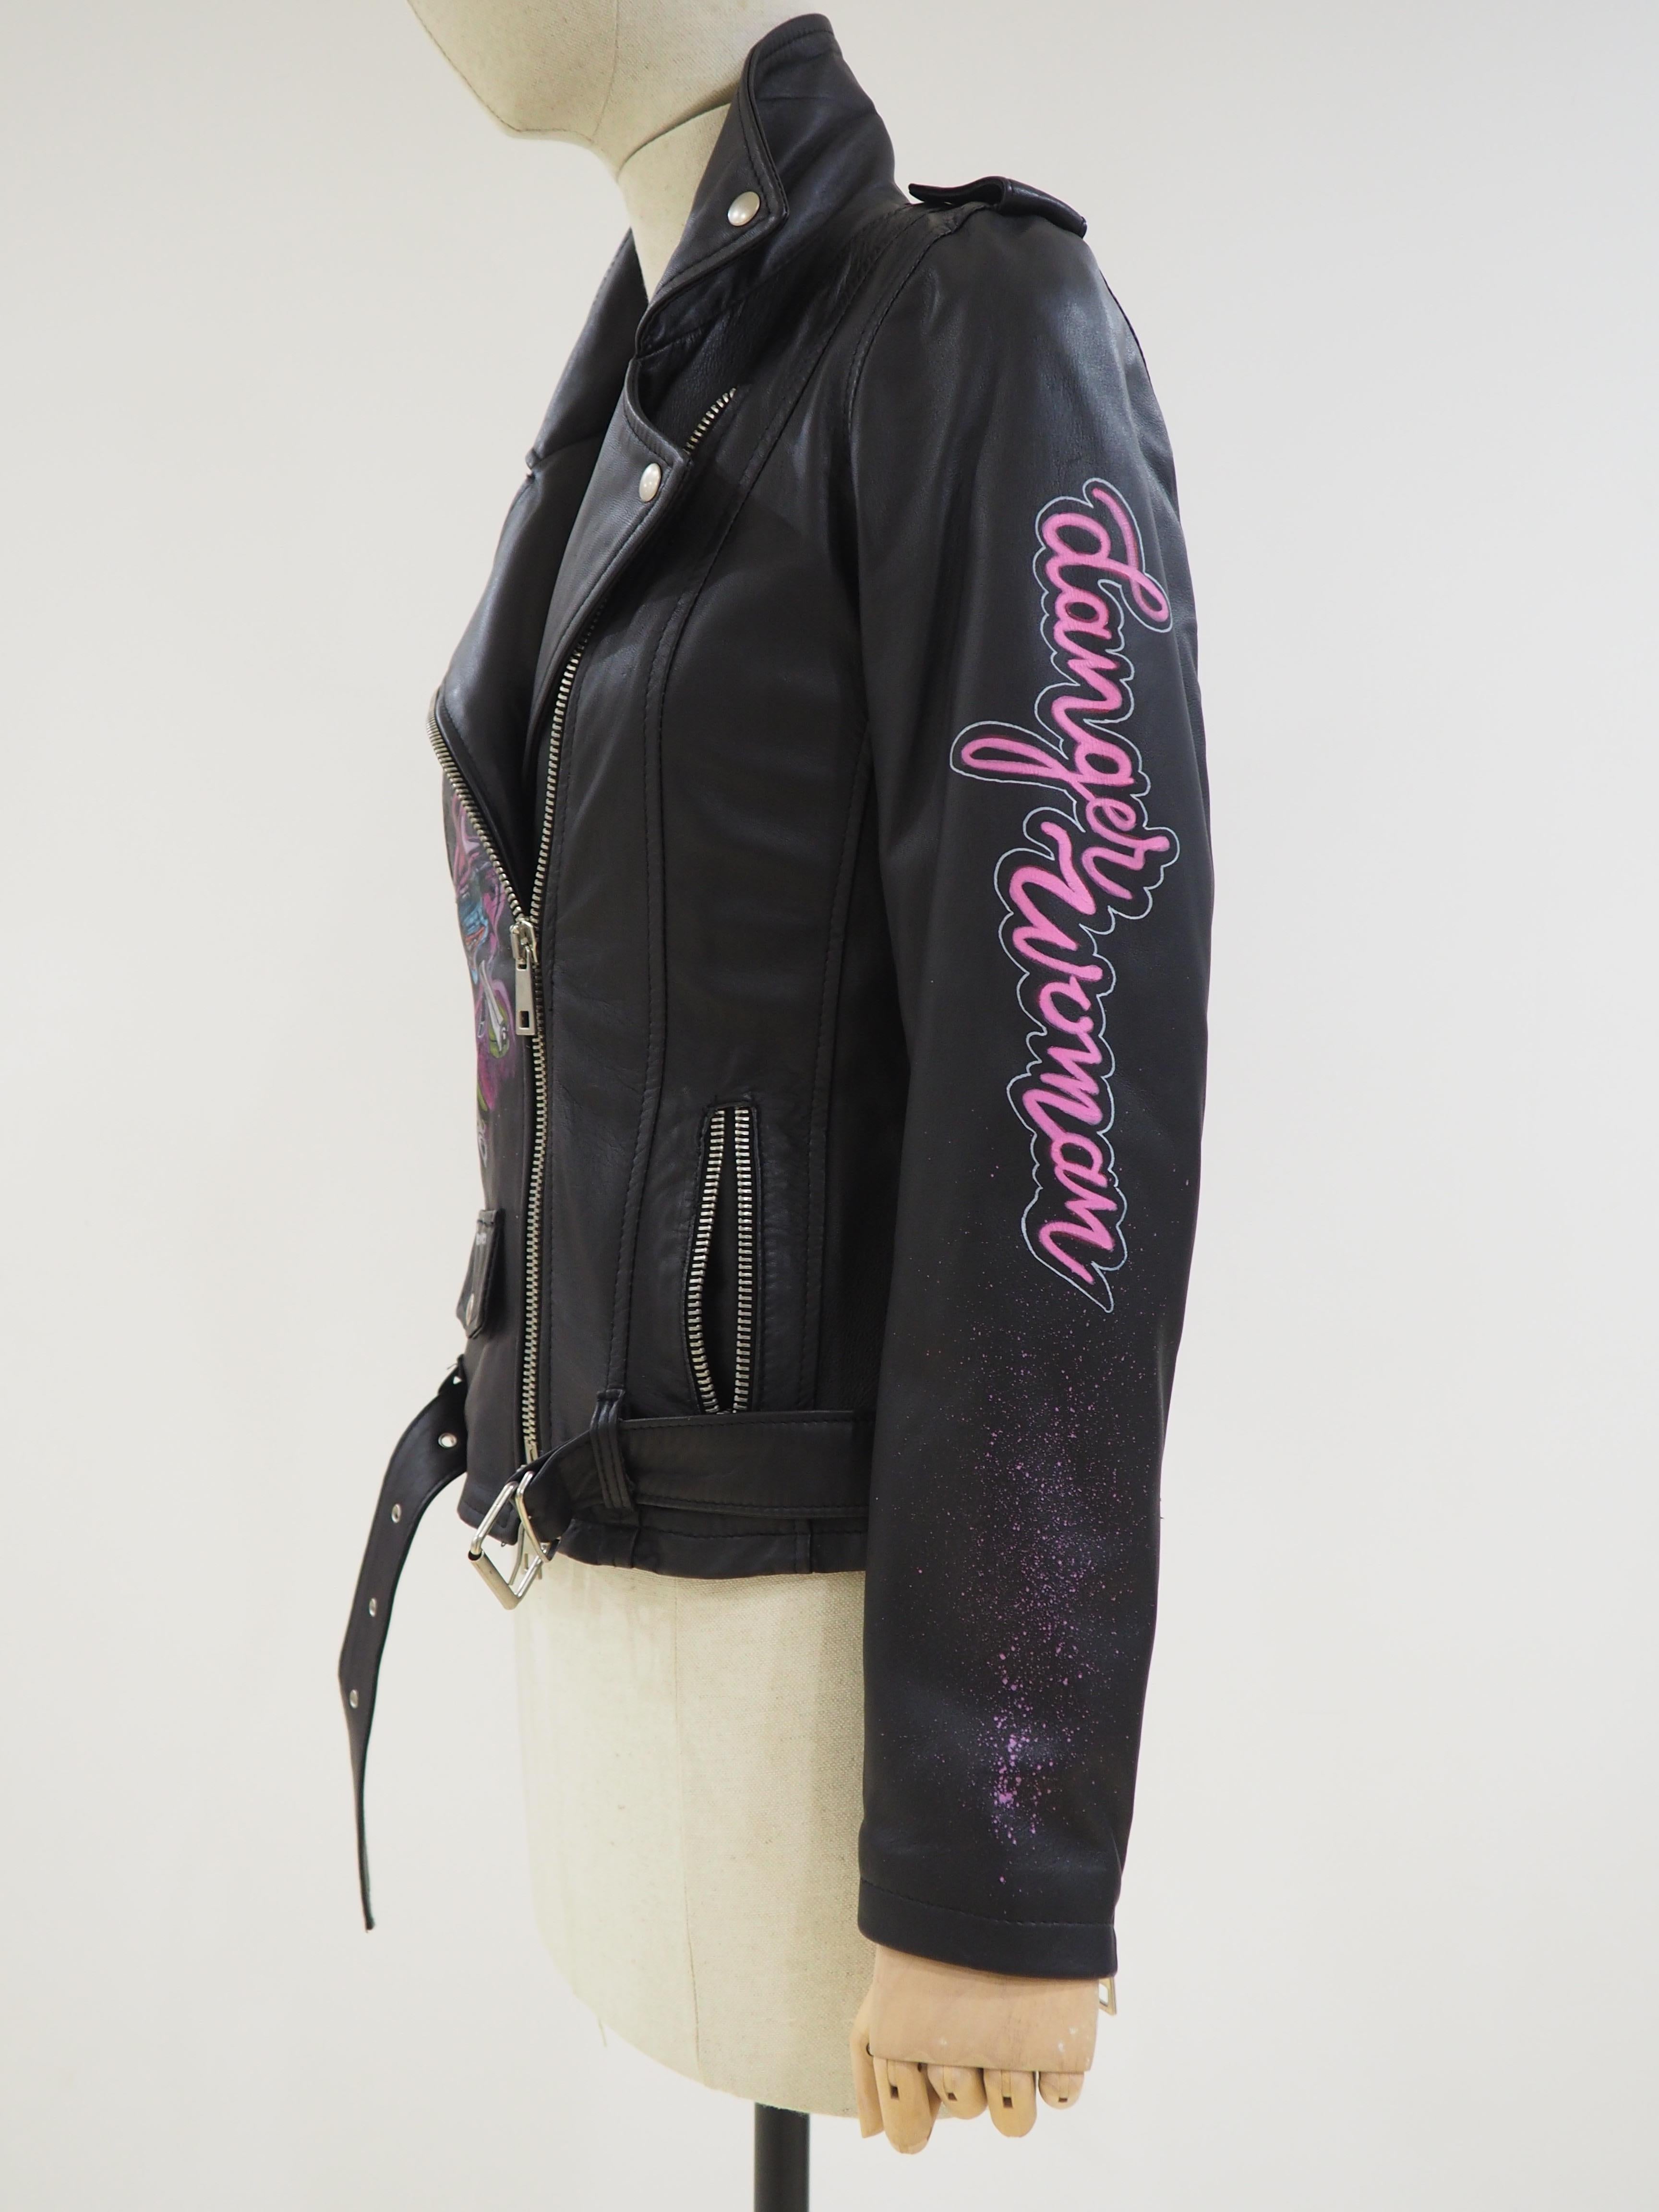 Gli Psicopatici Black Leather danger woman jacket
Italian designer Gli Psicopatici totally made in italy in size S 100% leather embellished with danger woman paint on the back
total lenght 56 cm
shoulder to hem 60 cm